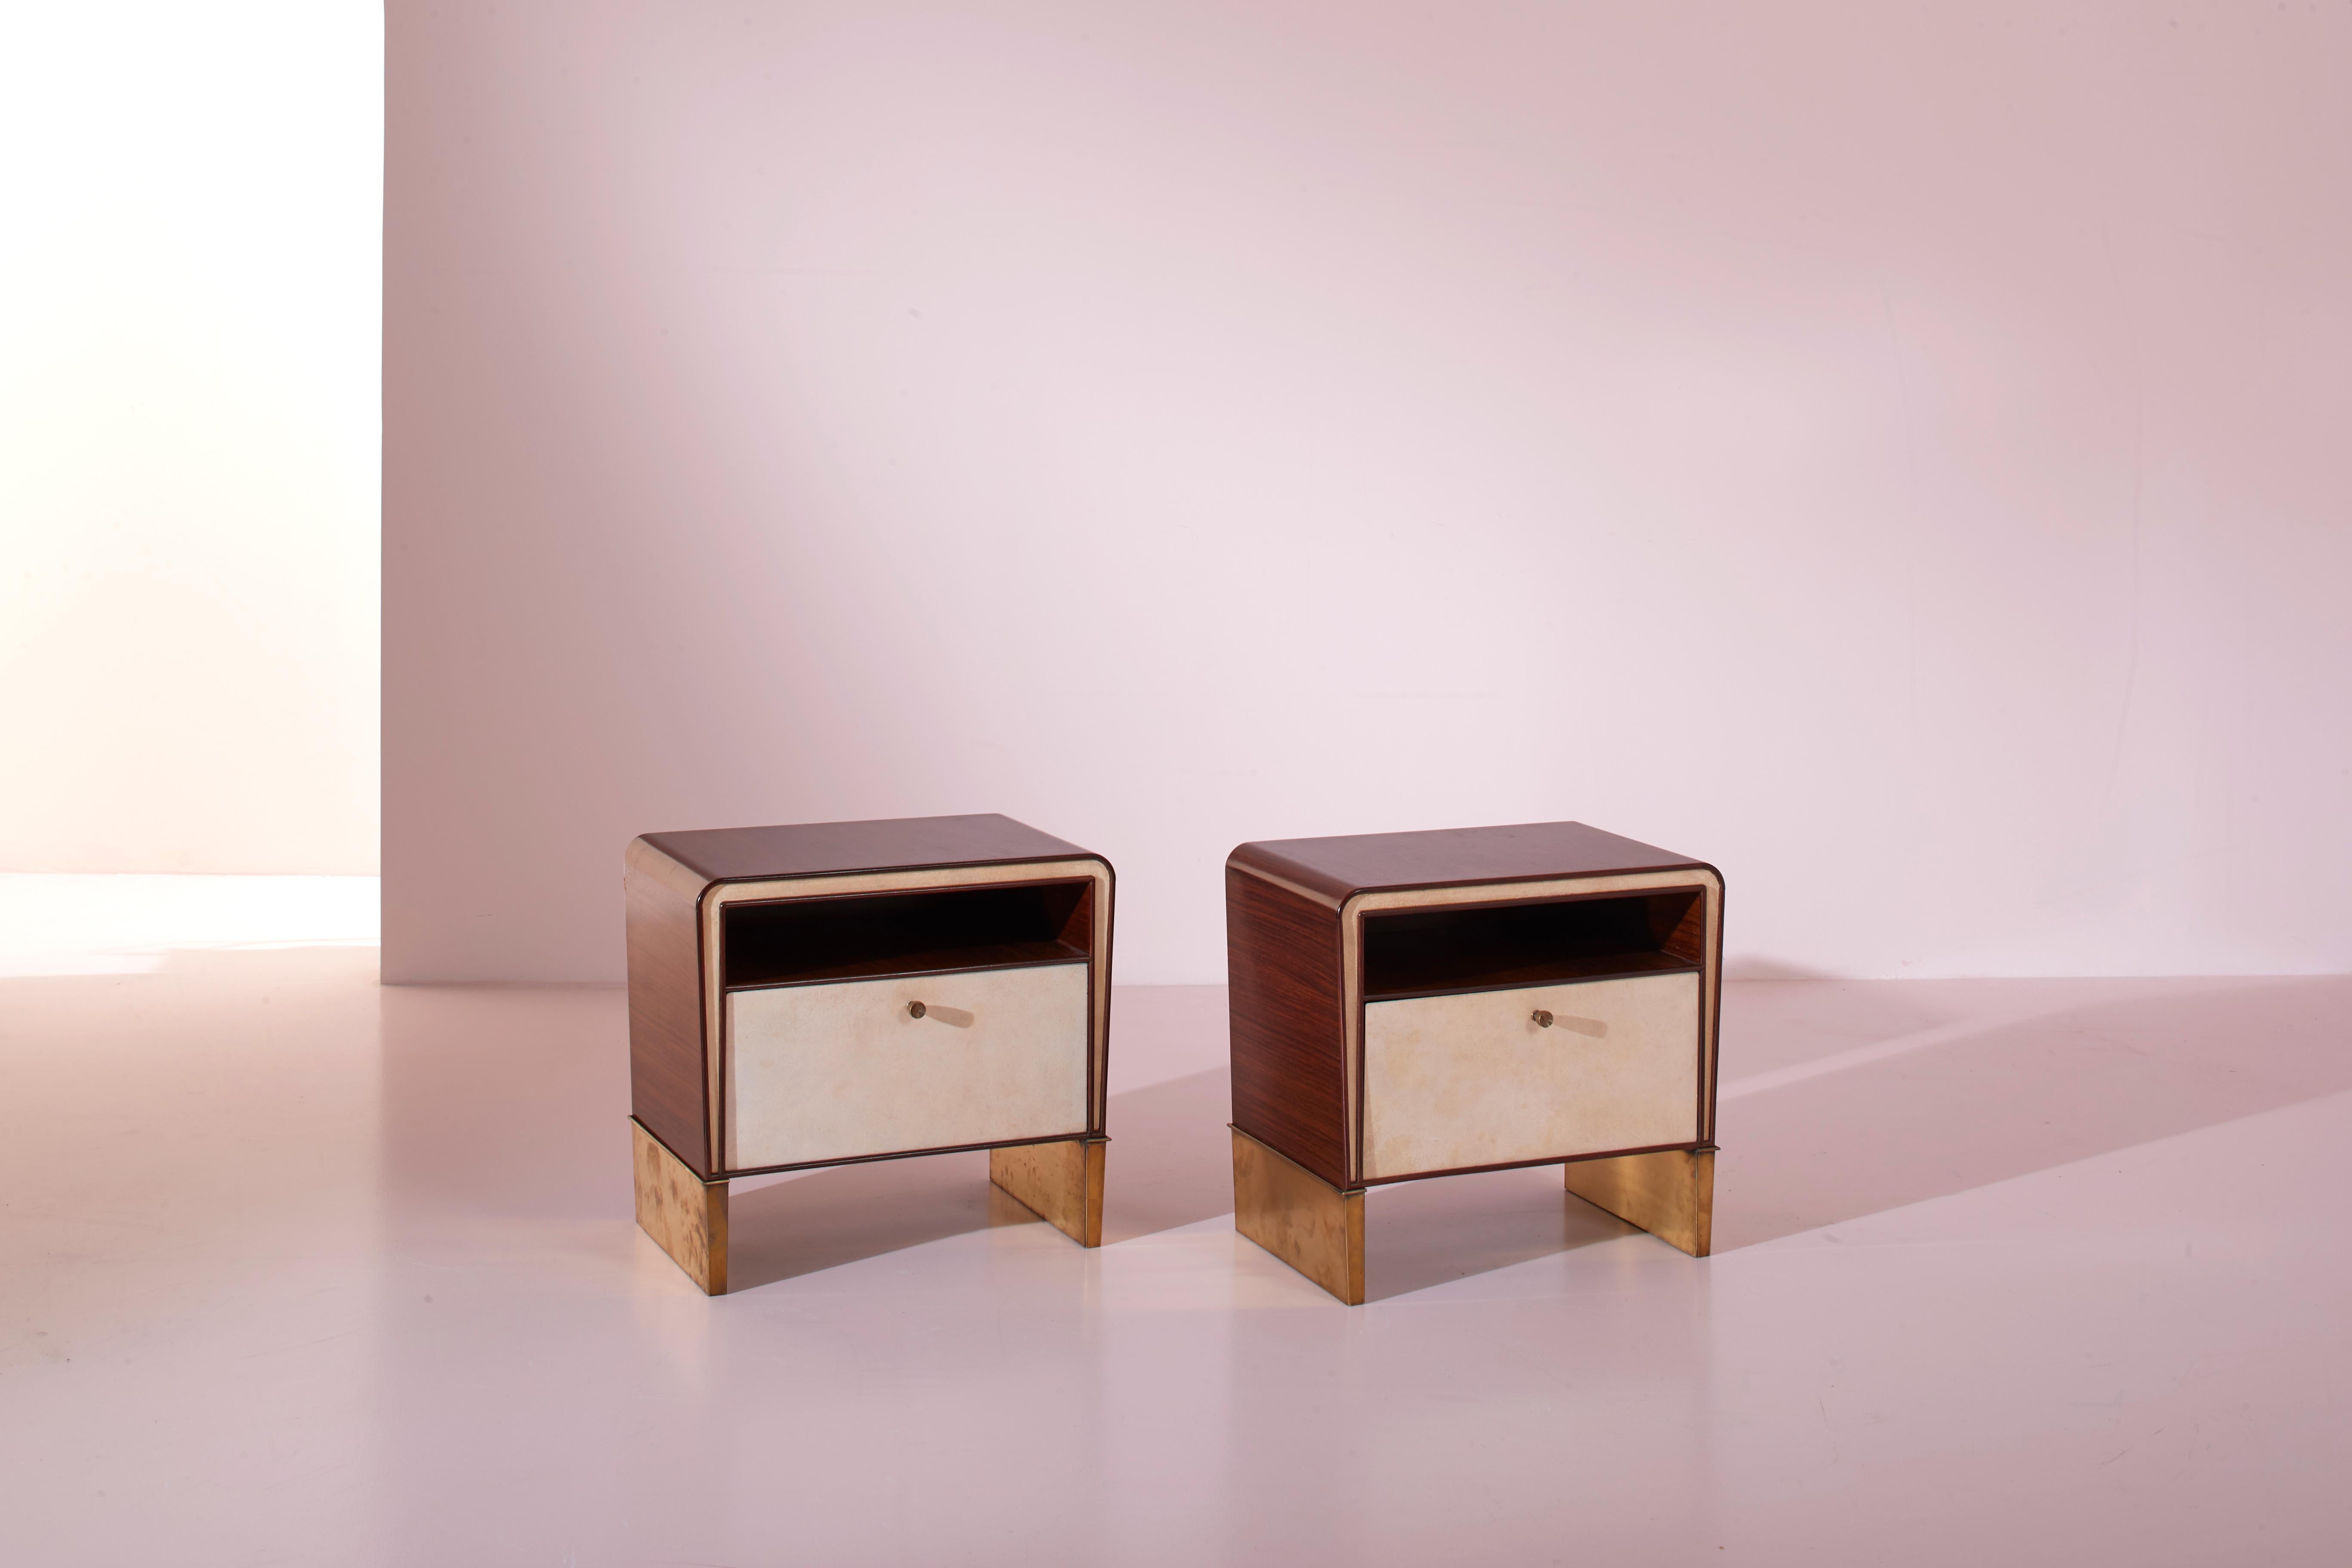 Pair of bedside tables in American walnut, parchment, and brass, designed by Gio Ponti in the 1930s, produced in Italy.

These refined bedside tables, conceived by Gio Ponti and characterized by a slender structure supported by elegant triangular